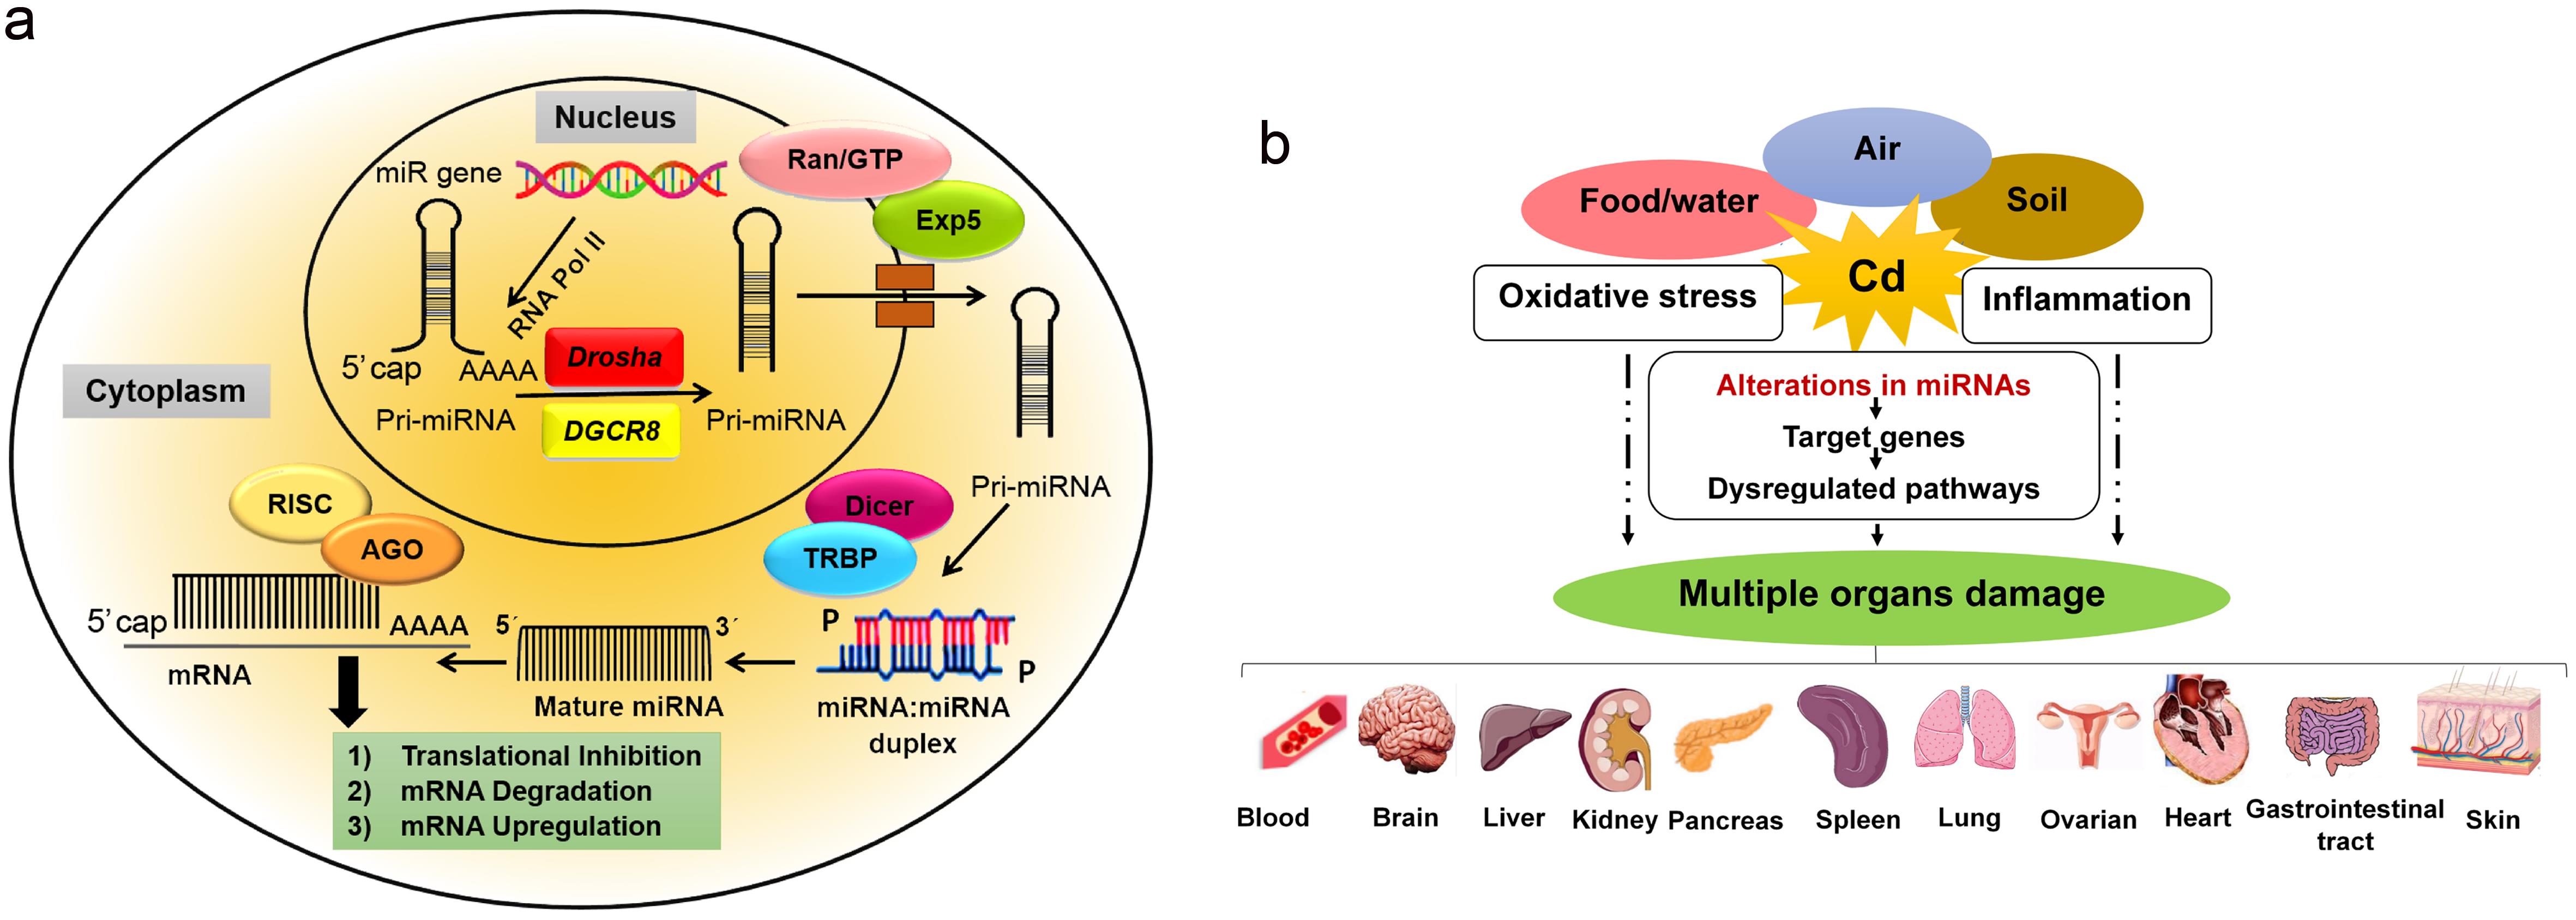 The miRNA biogenesis and toxic roles of Cd  on the different organs of human.